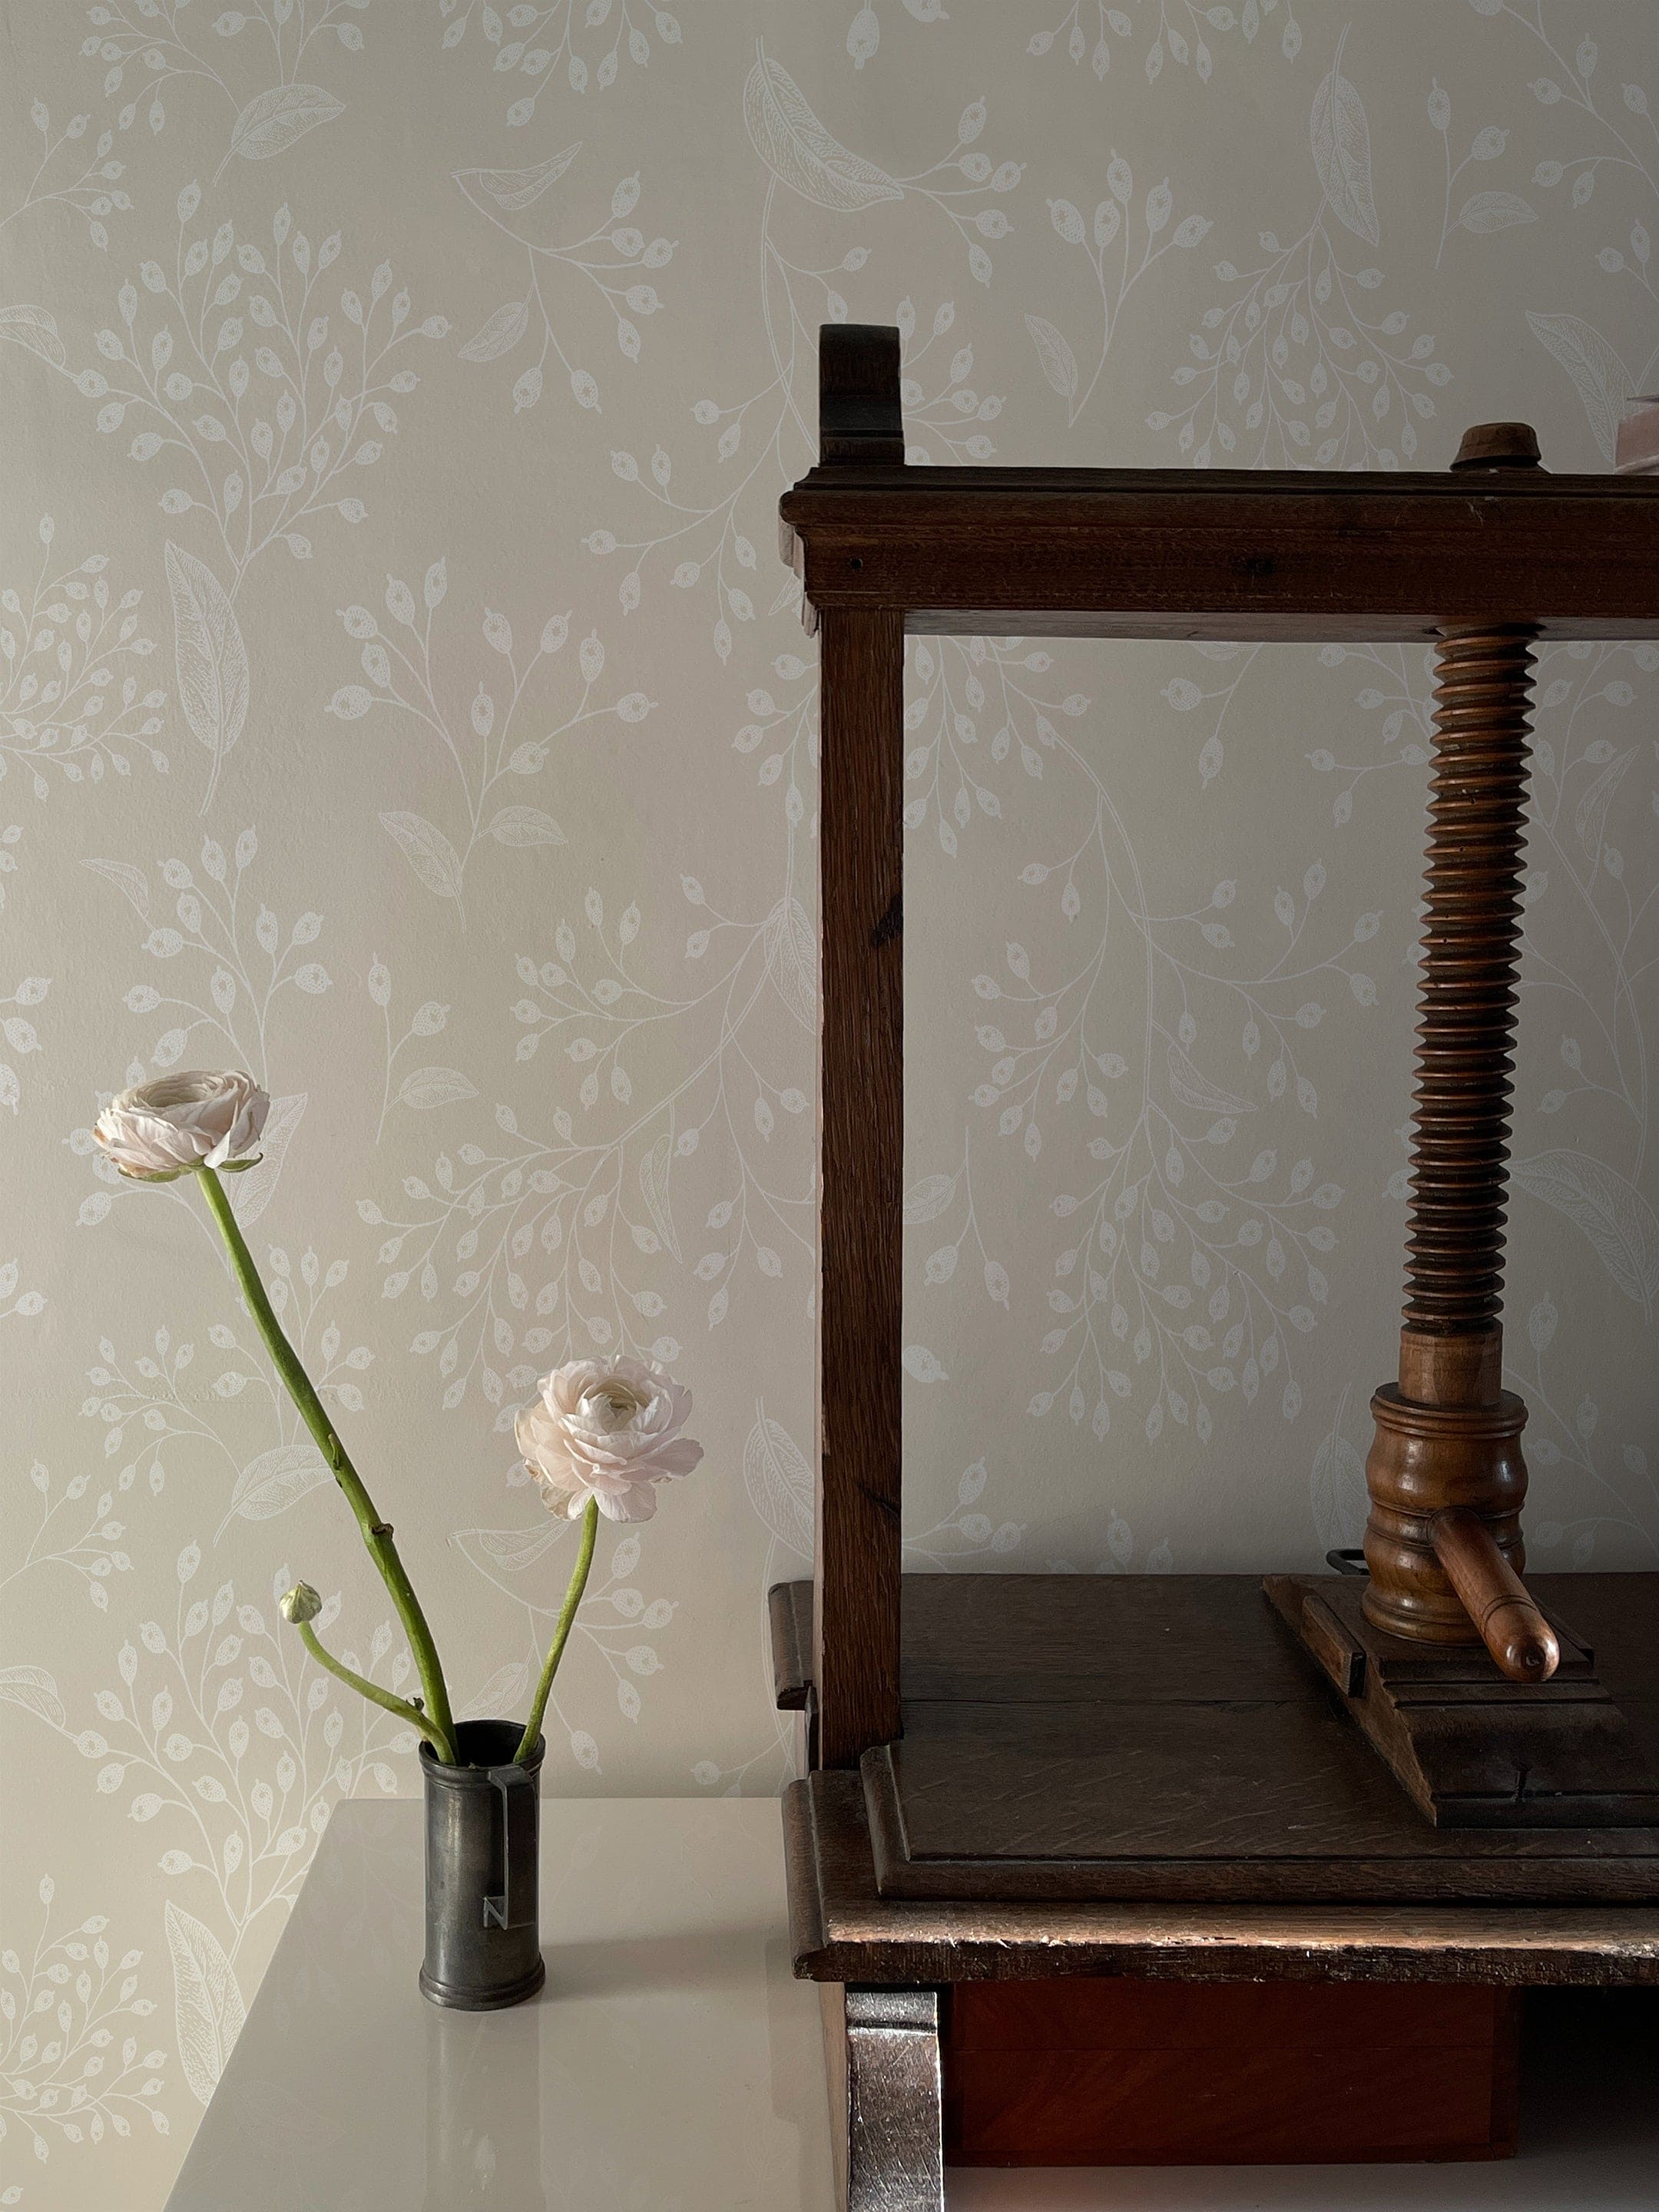 A subtle and elegant home decor setup showcasing the Botanical Whisper Wallpaper, which features a delicate pattern of soft beige botanical prints. A dark wooden antique book press and a small vase with two blooming flowers enhance the vintage charm of the room.